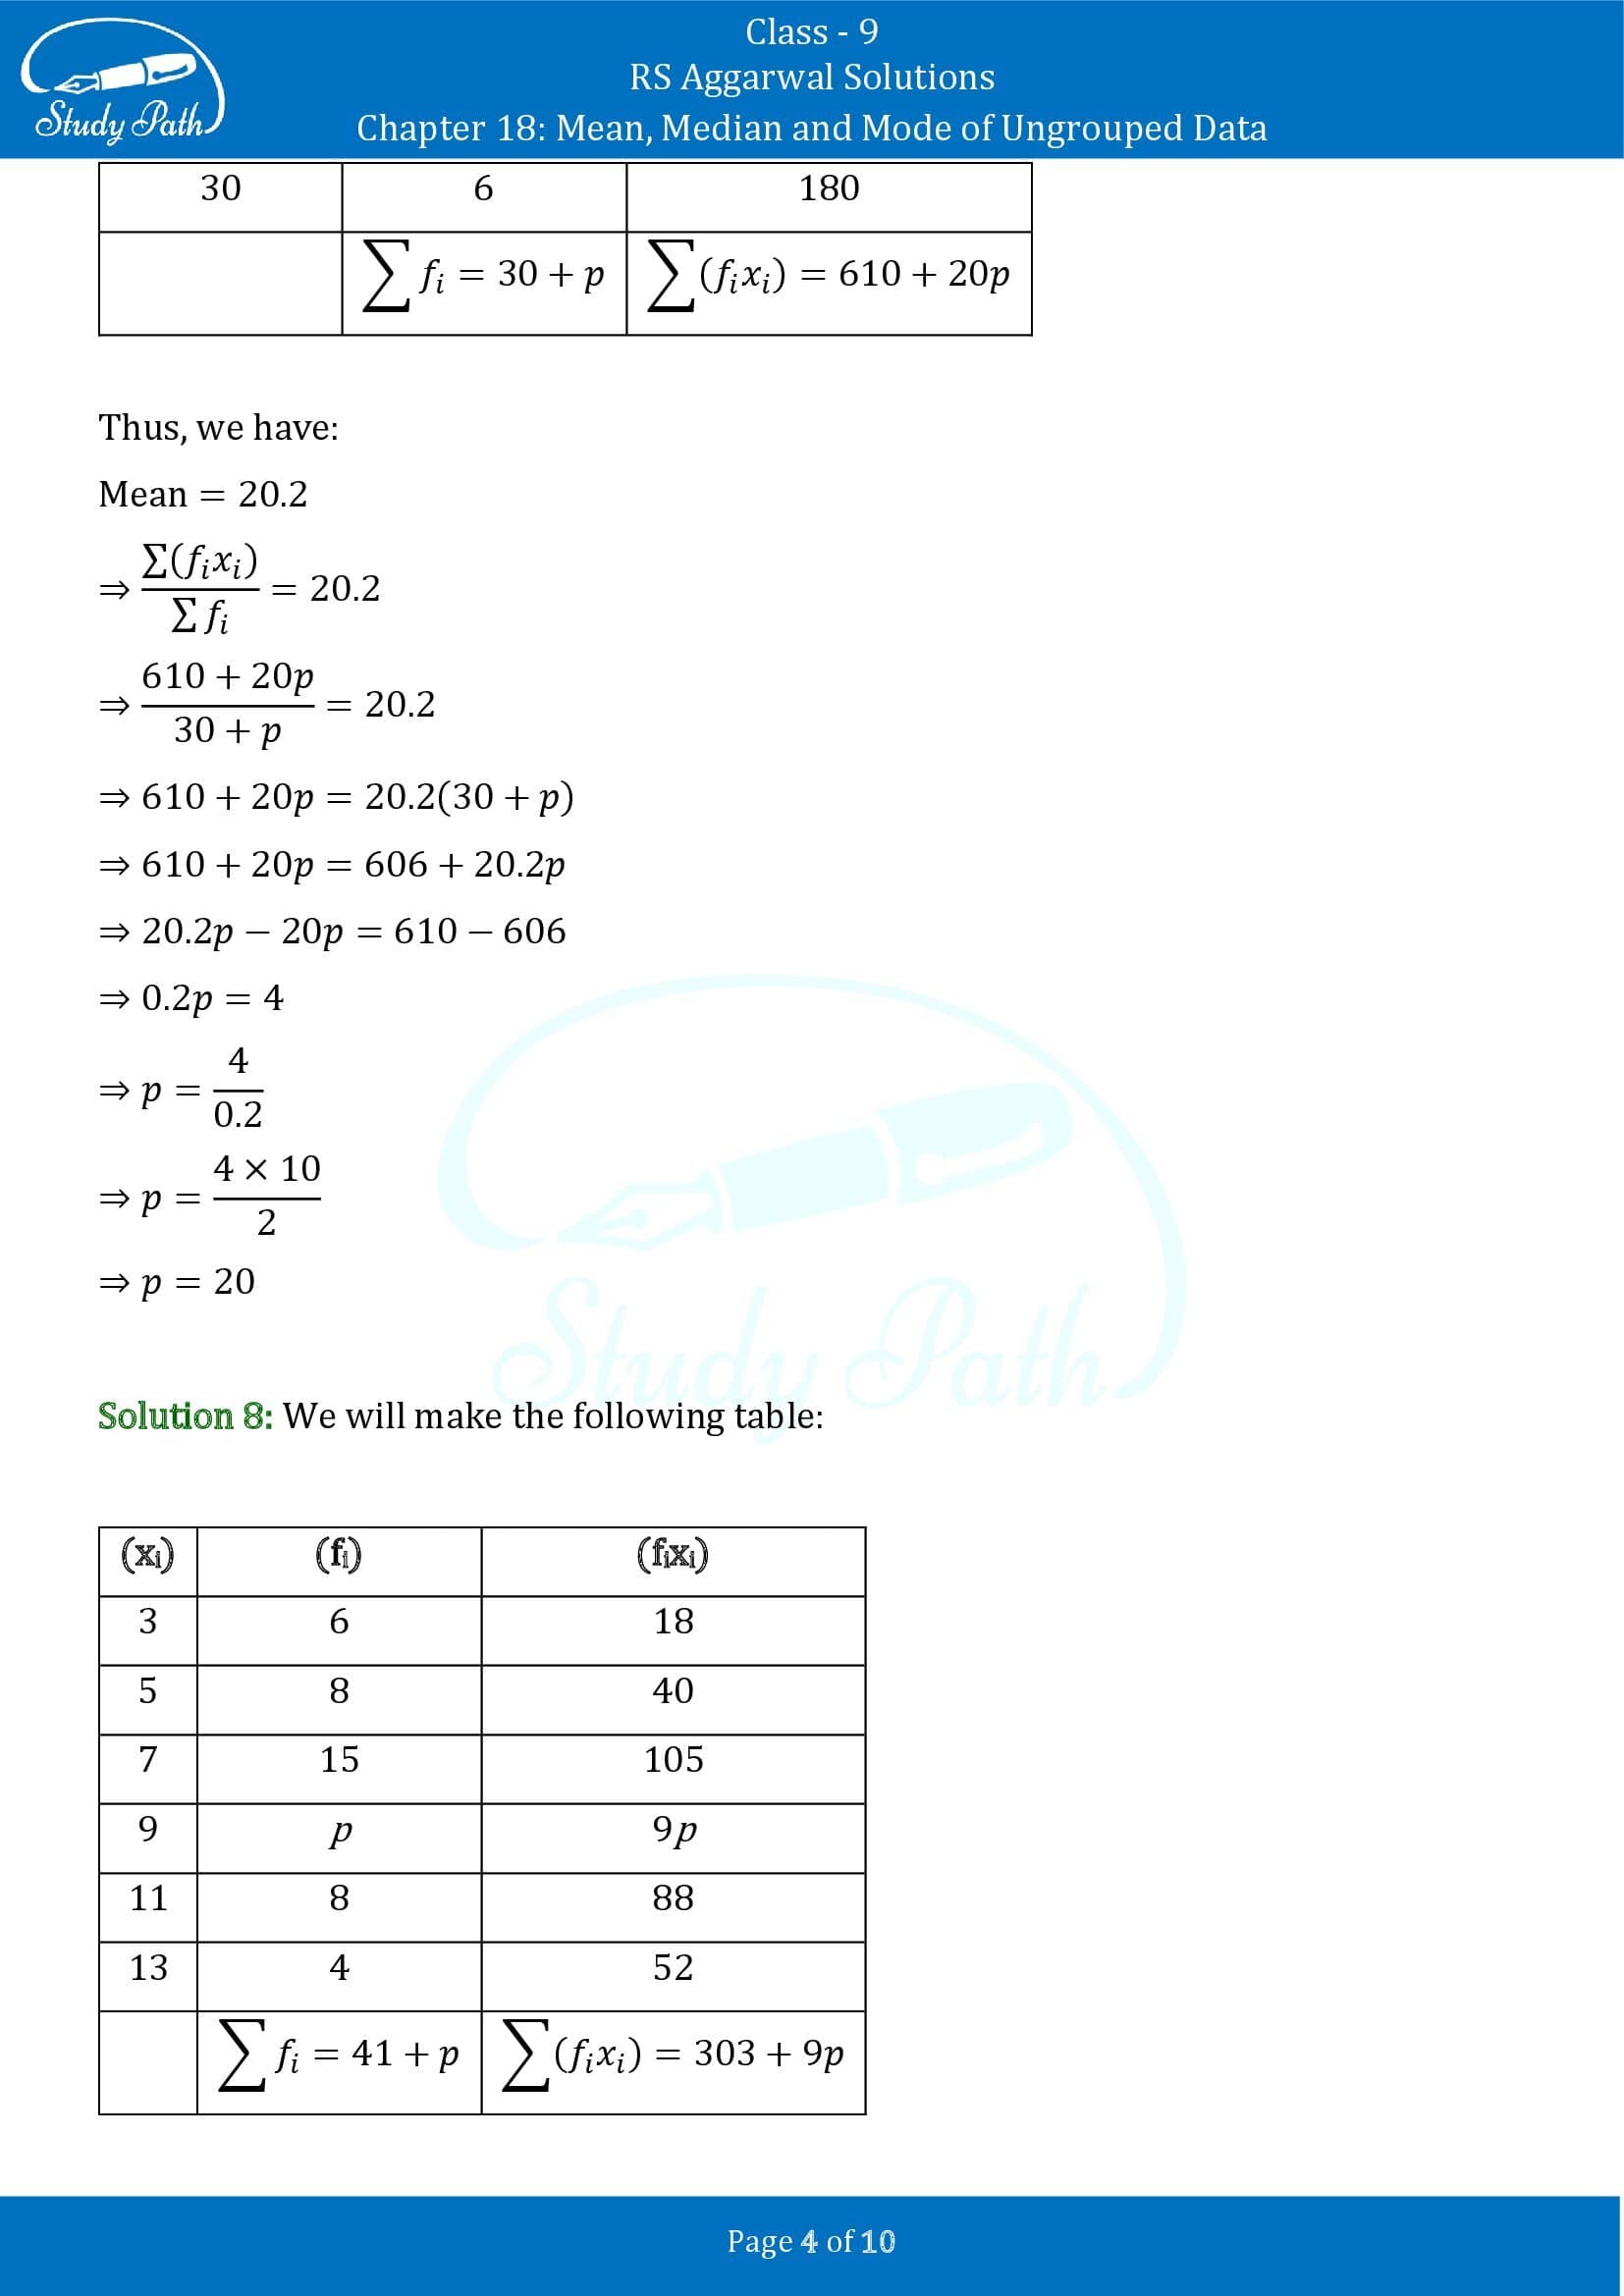 RS Aggarwal Solutions Class 9 Chapter 18 Mean Median and Mode of Ungrouped Data Exercise 18B 00004